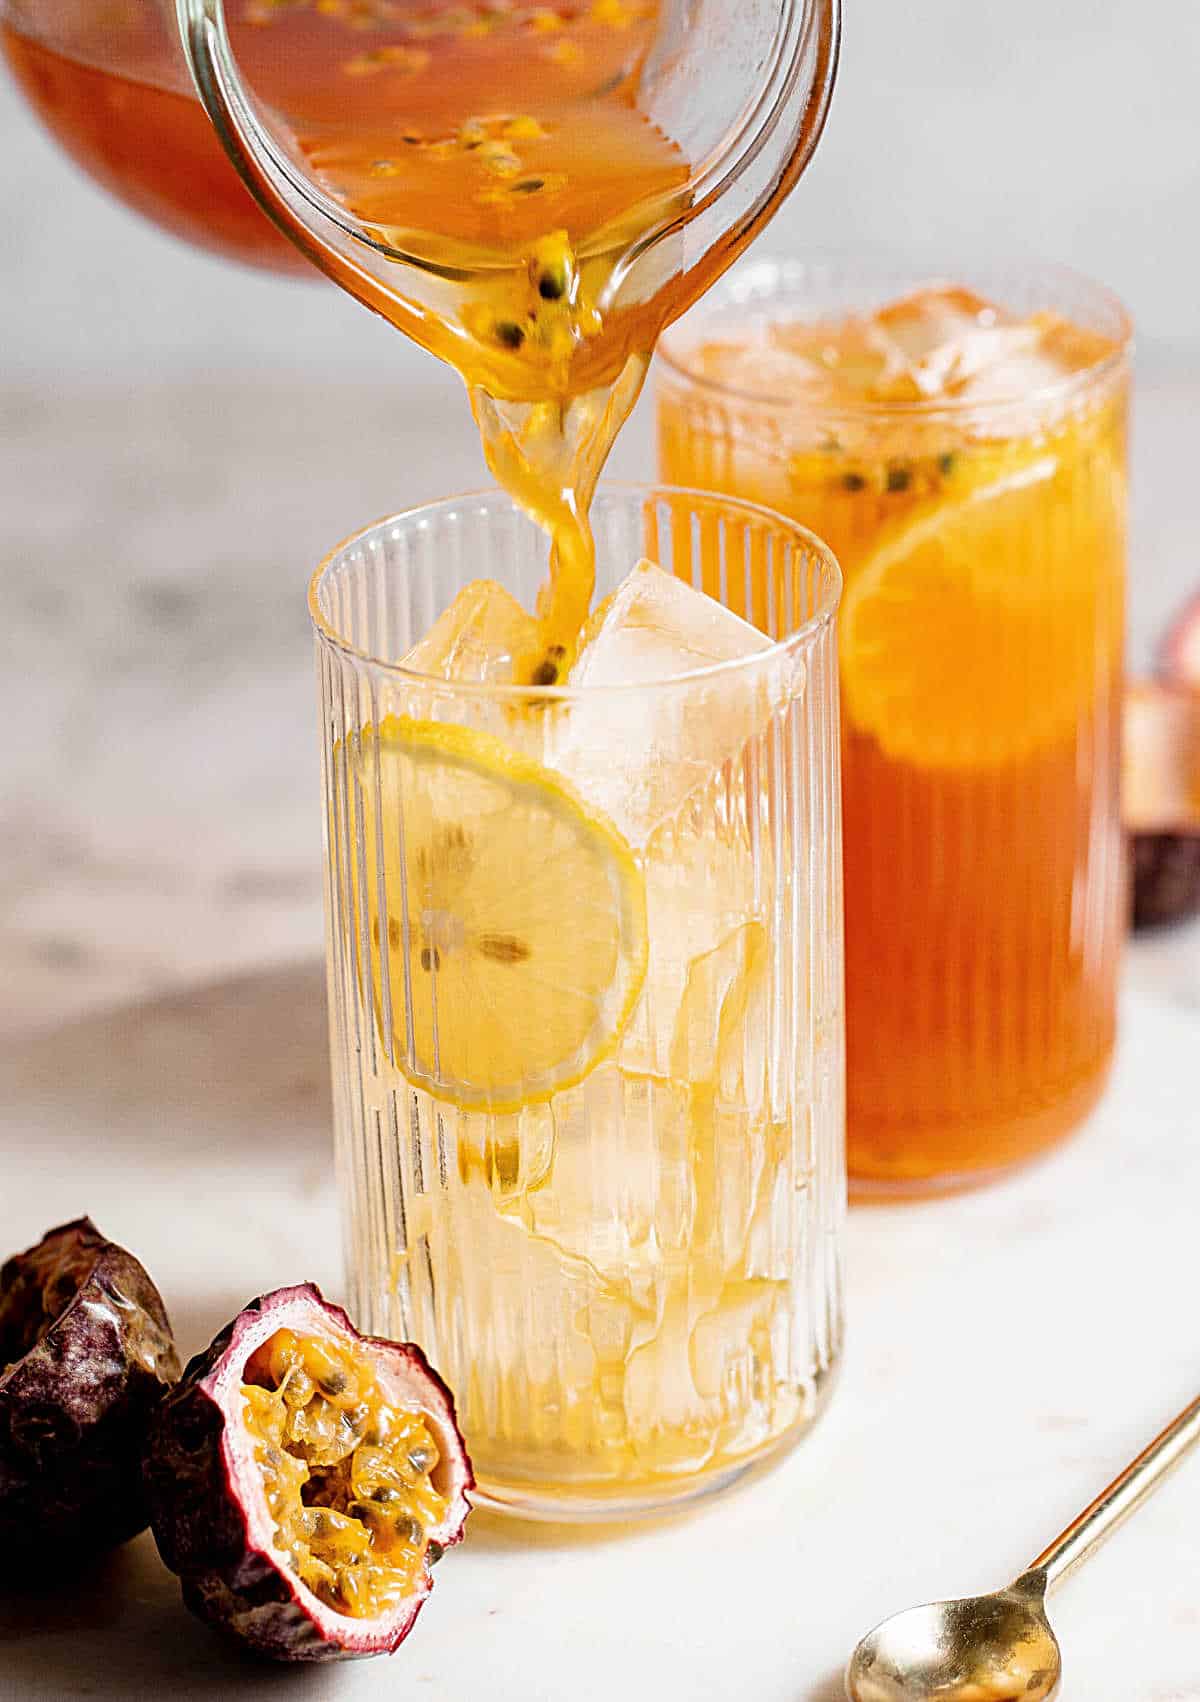 Pouring passionfruit tea from a jug into tall glasses with ice. White marble surface, grey background.